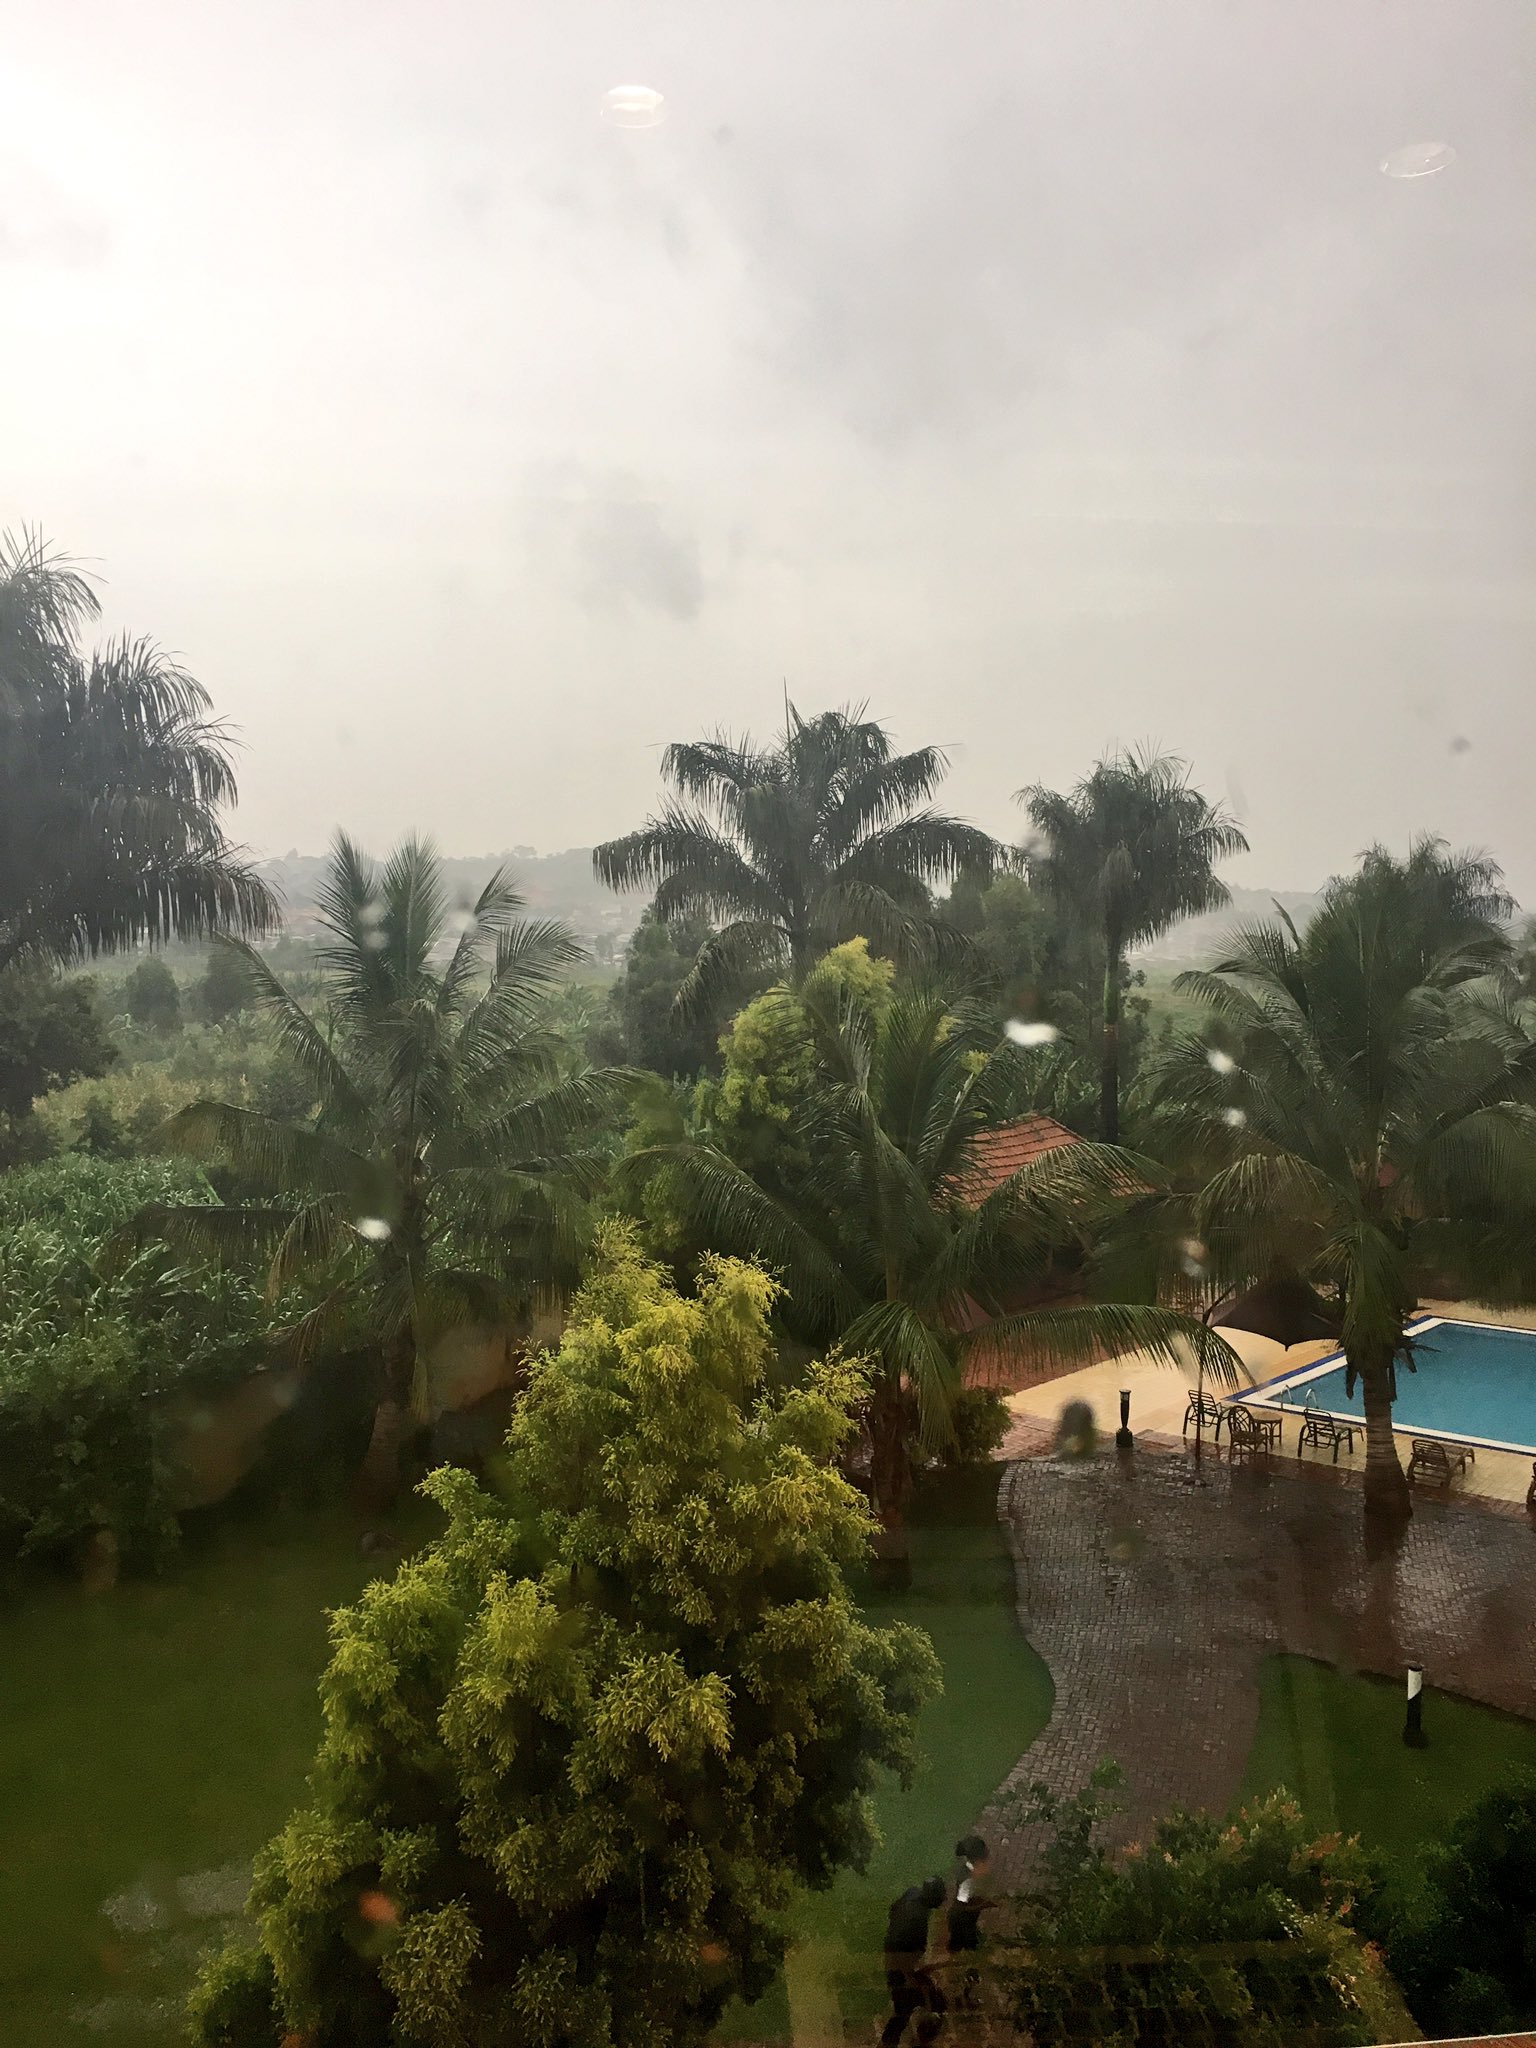 Glad we have a wetland nearby to absorb all the heavy rain that started during the #CBA11 closing plenary! 🌧#EbA for #CBA @IIED https://t.co/ZxrtPsDrfF